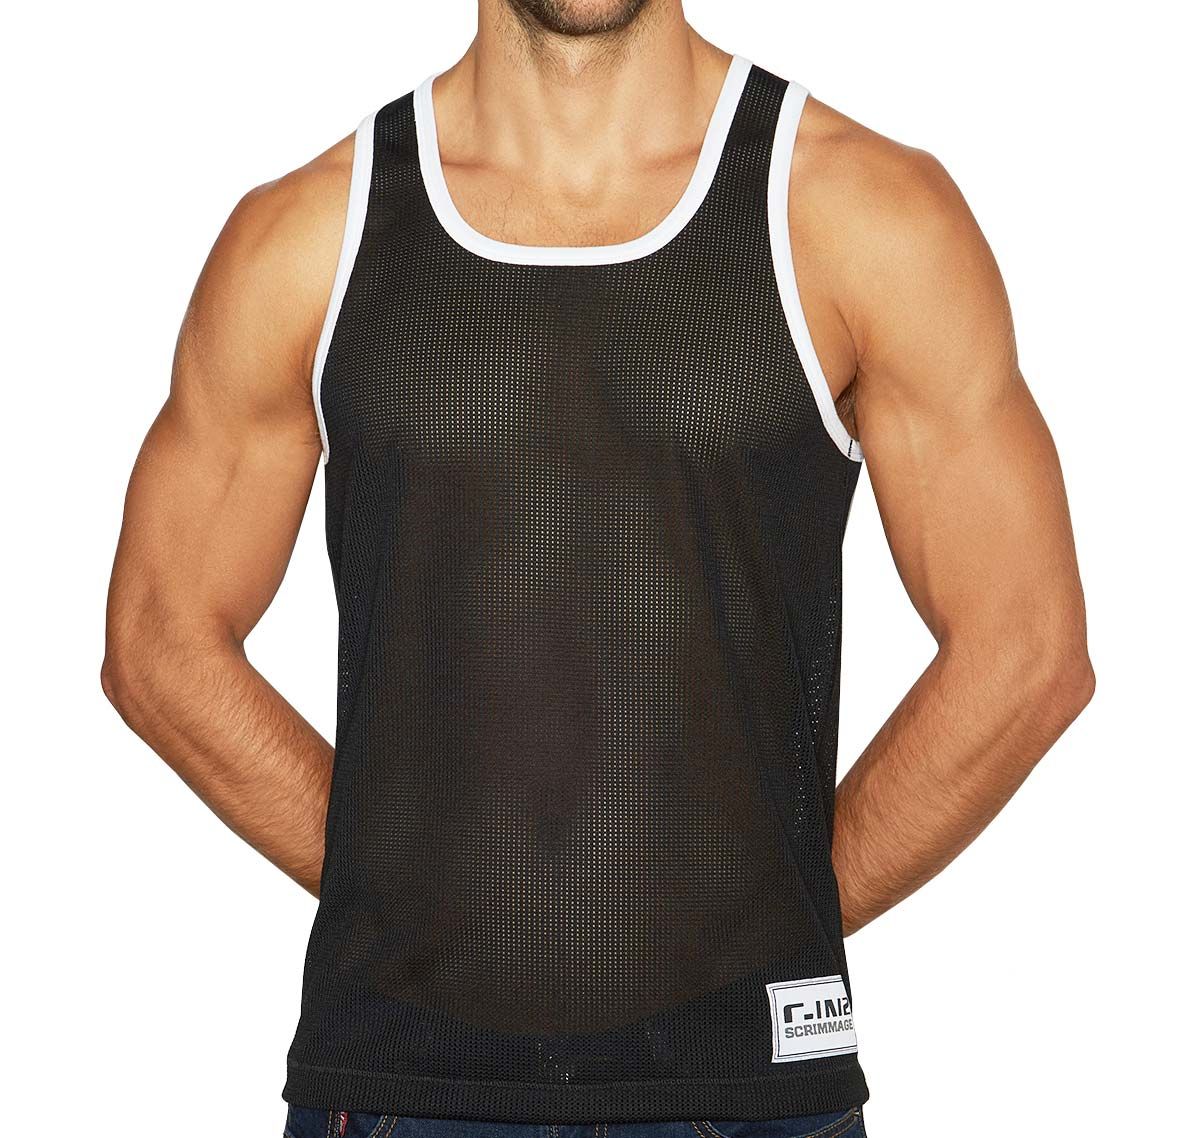 C-IN2 Débardeur SCRIMMAGE RELAXED TANK 6806-002A, noir